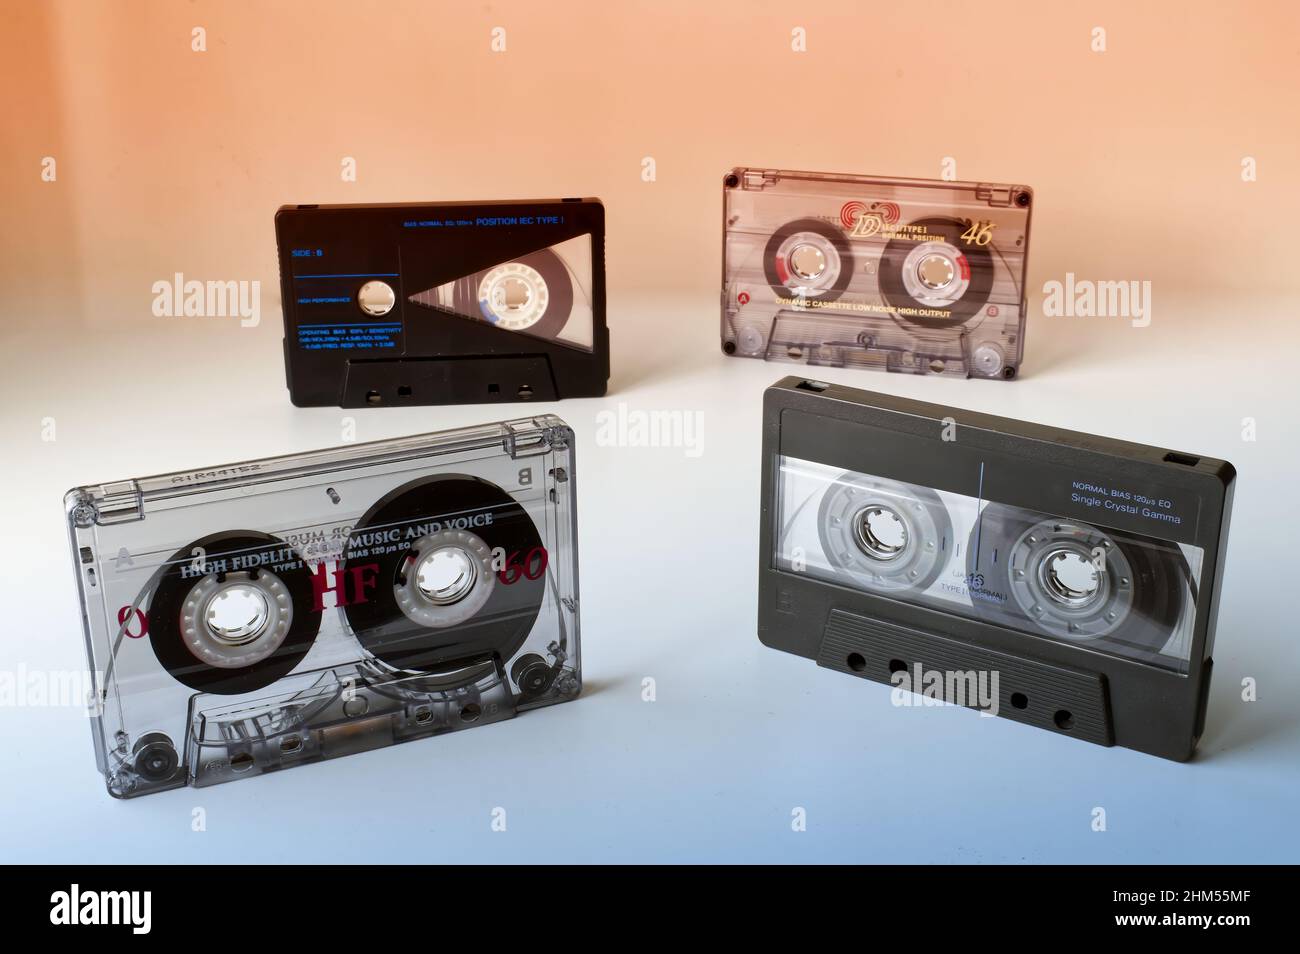 Reel to Reel Blank Audio Cassette Tape for Music Recording, 46 Minutes  Normal Bias Low Noise, DIY Homemade Clear Audio Cassette Tape Sound  Recording